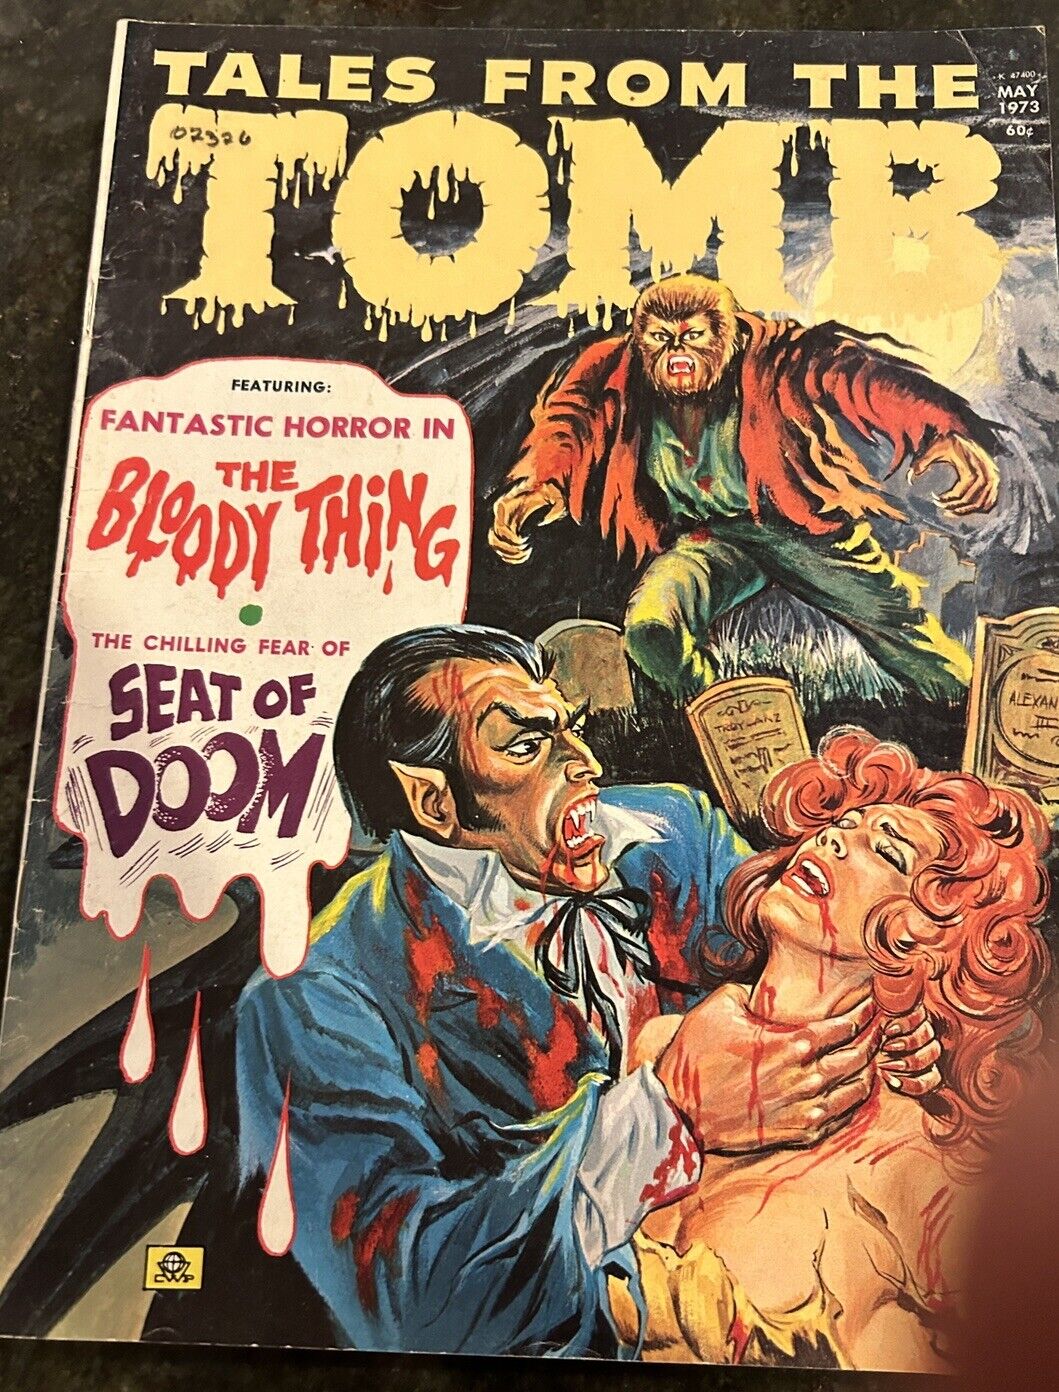 Tales from the Tomb Vol. 5  1973